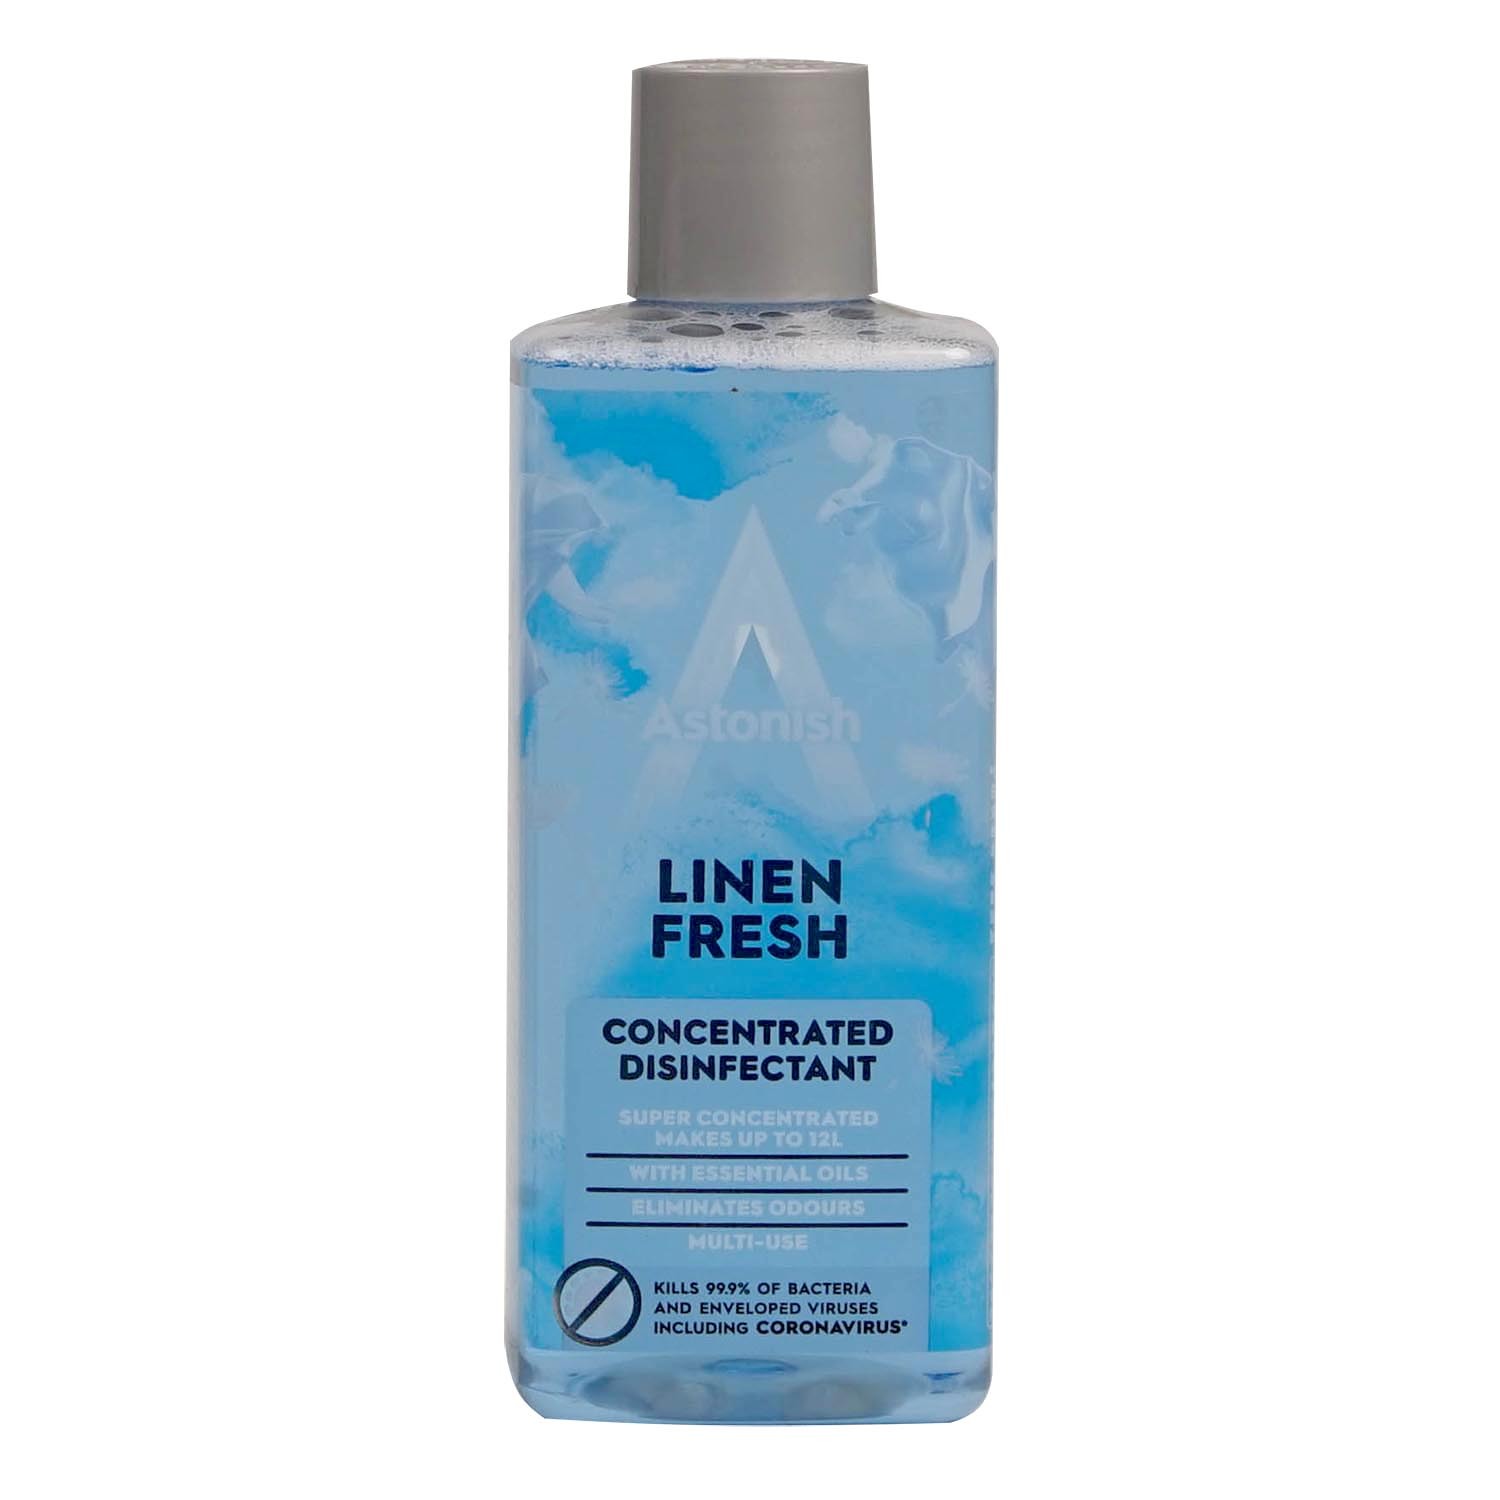 Astonish Super Concentrated Disinfectant - Florals Image 1